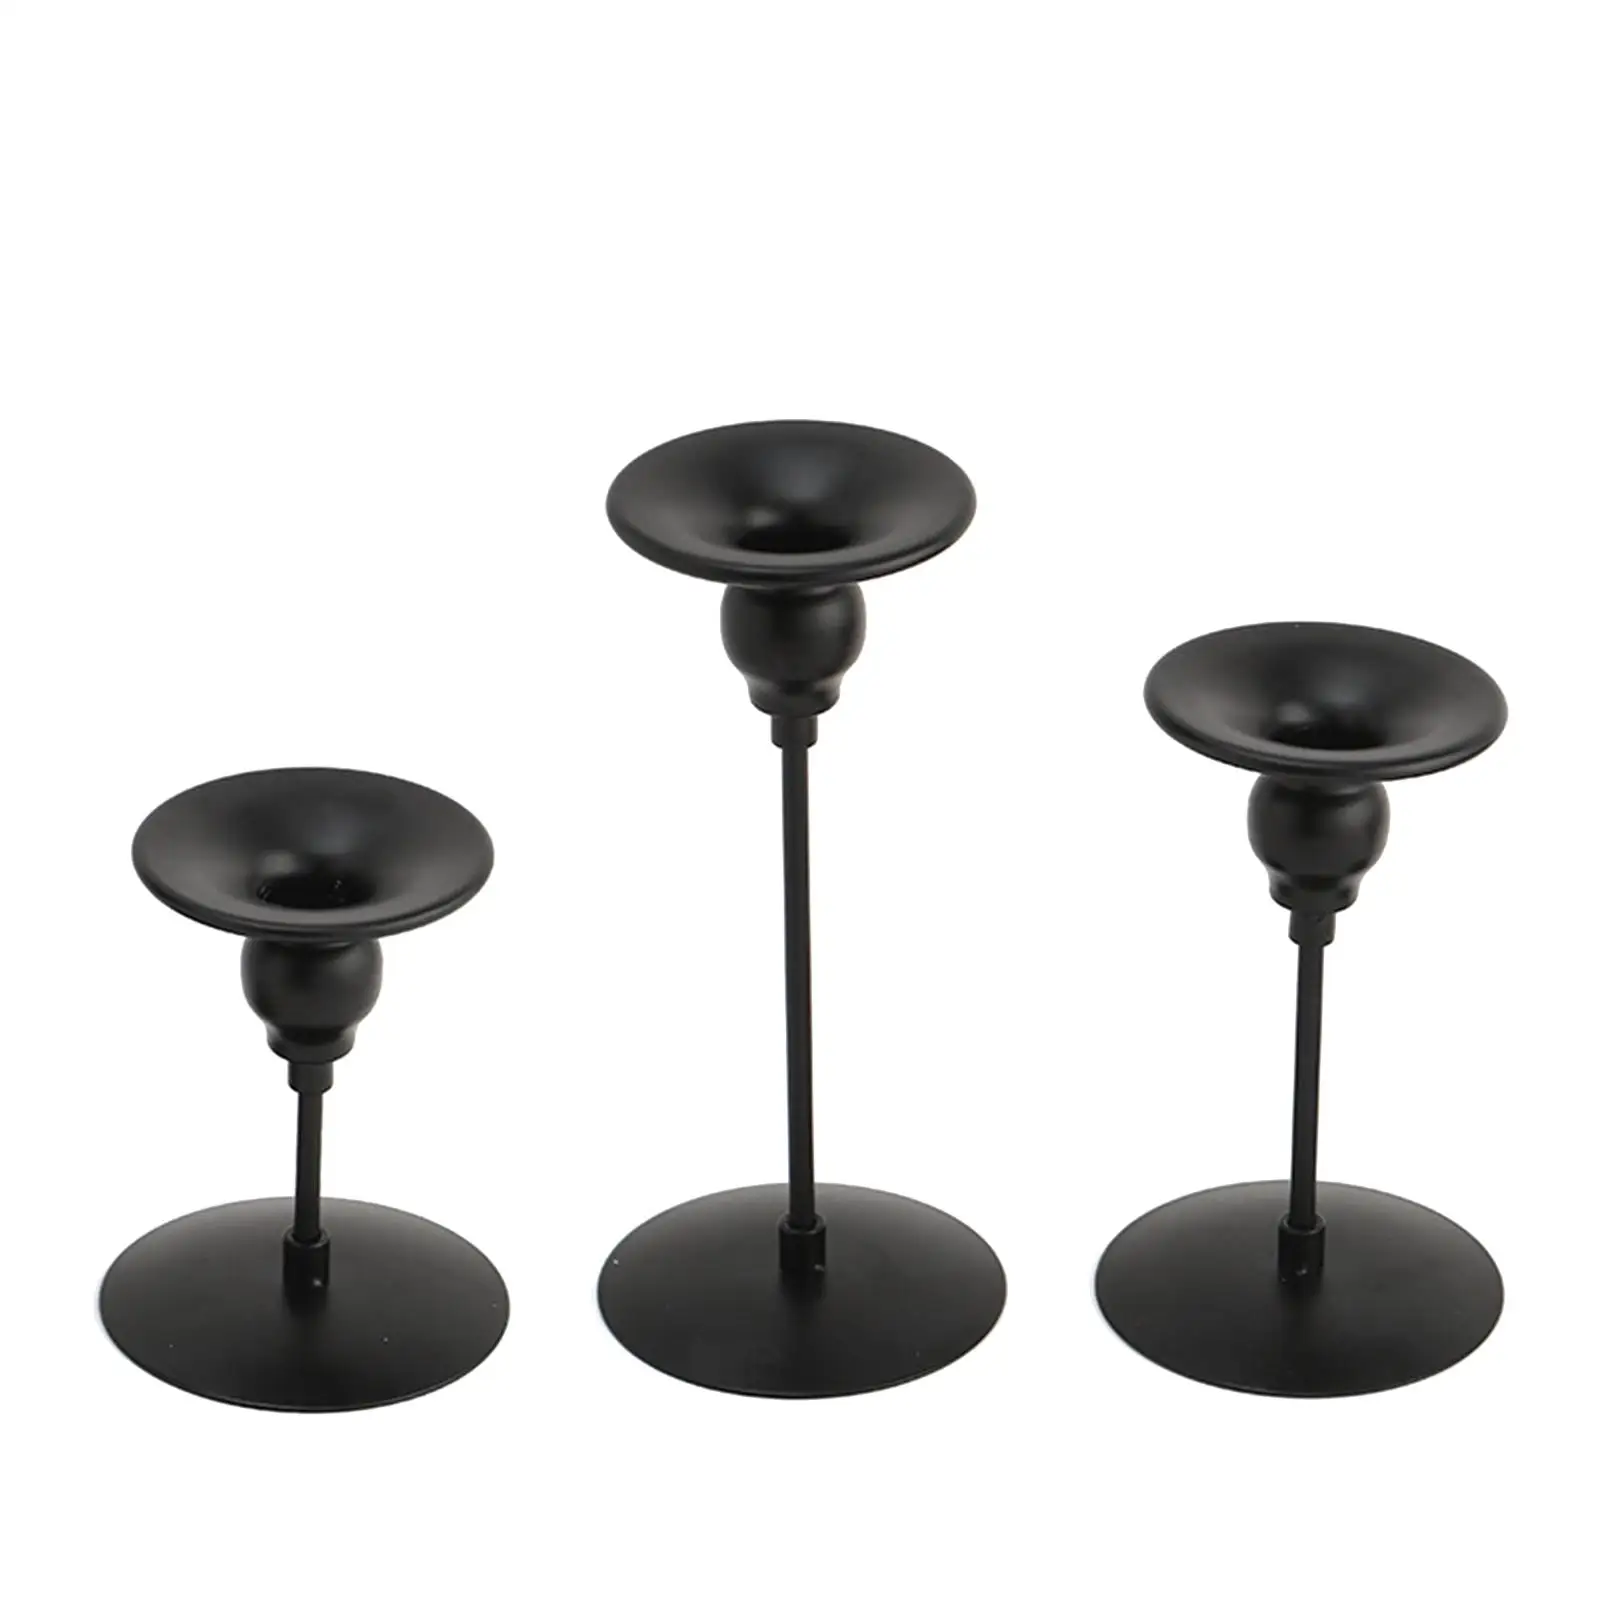 3Pcs Metal Candle Holders Black Candlestick Holders Pavilion Gift for Wedding Centerpieces Stable Base Adornment Decorative